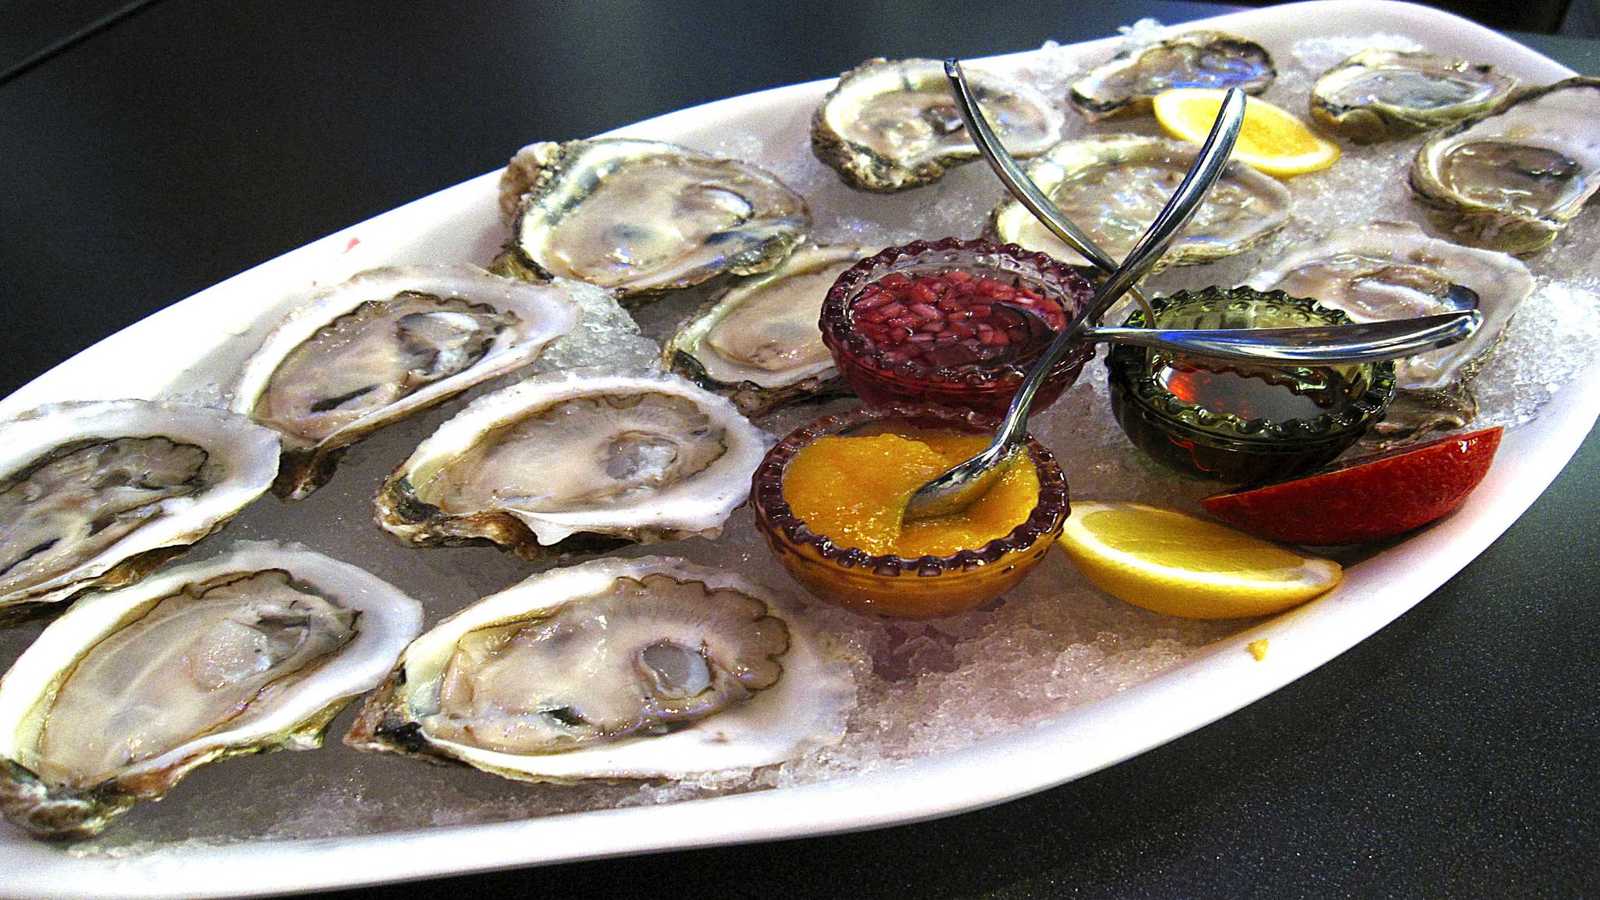 Food Standards Agency recalls Oysters due to norovirus concerns